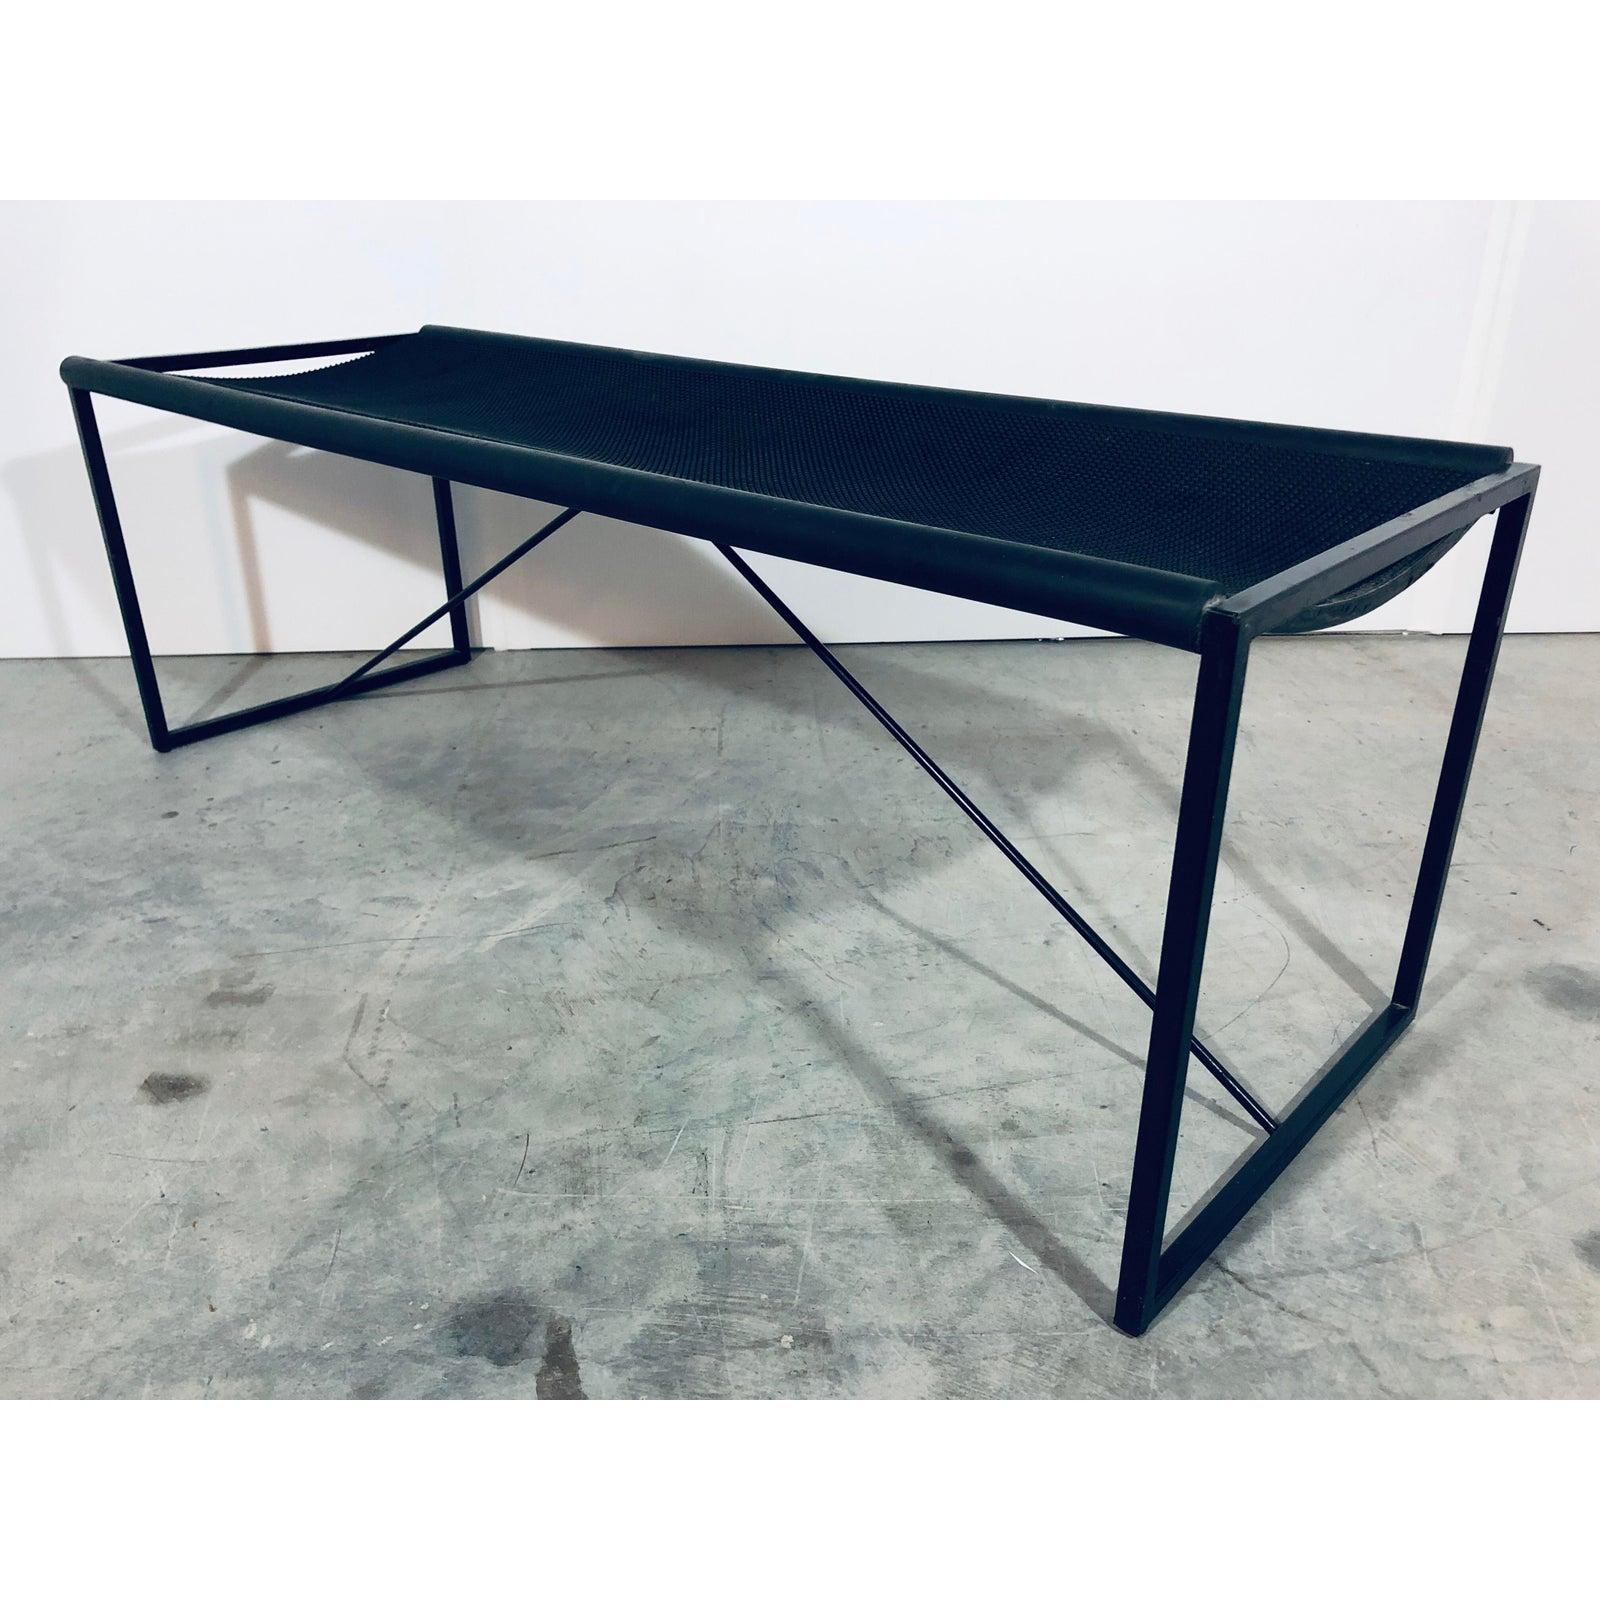 Maurizio Peregalli Modernist Bench for Zues, Italy, 1980s For Sale 2